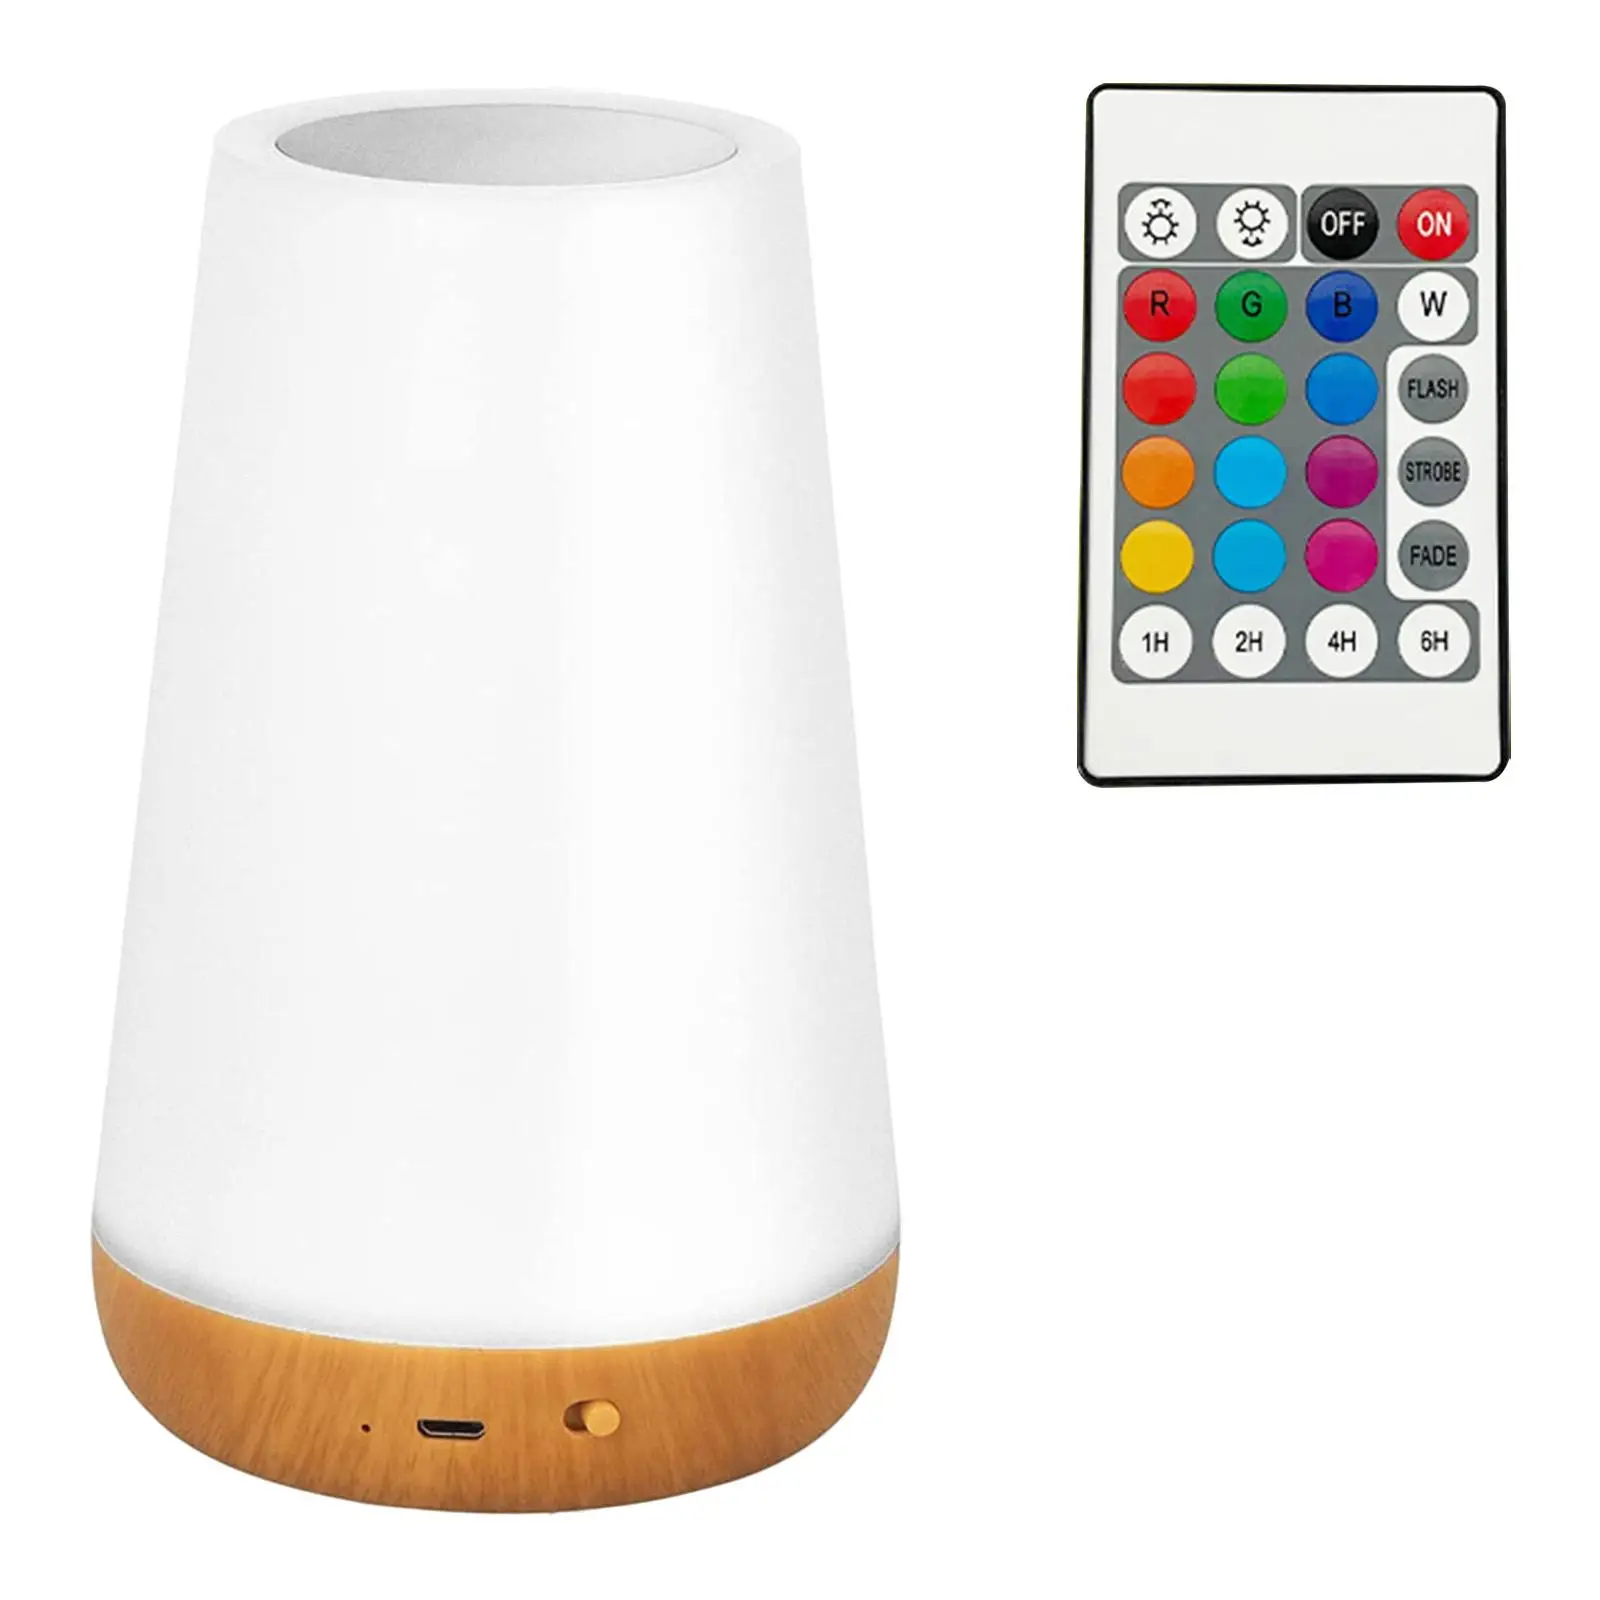 Creative Remote Table Lamp Touch Control Dimmable Decorative LED for NightStand Gift